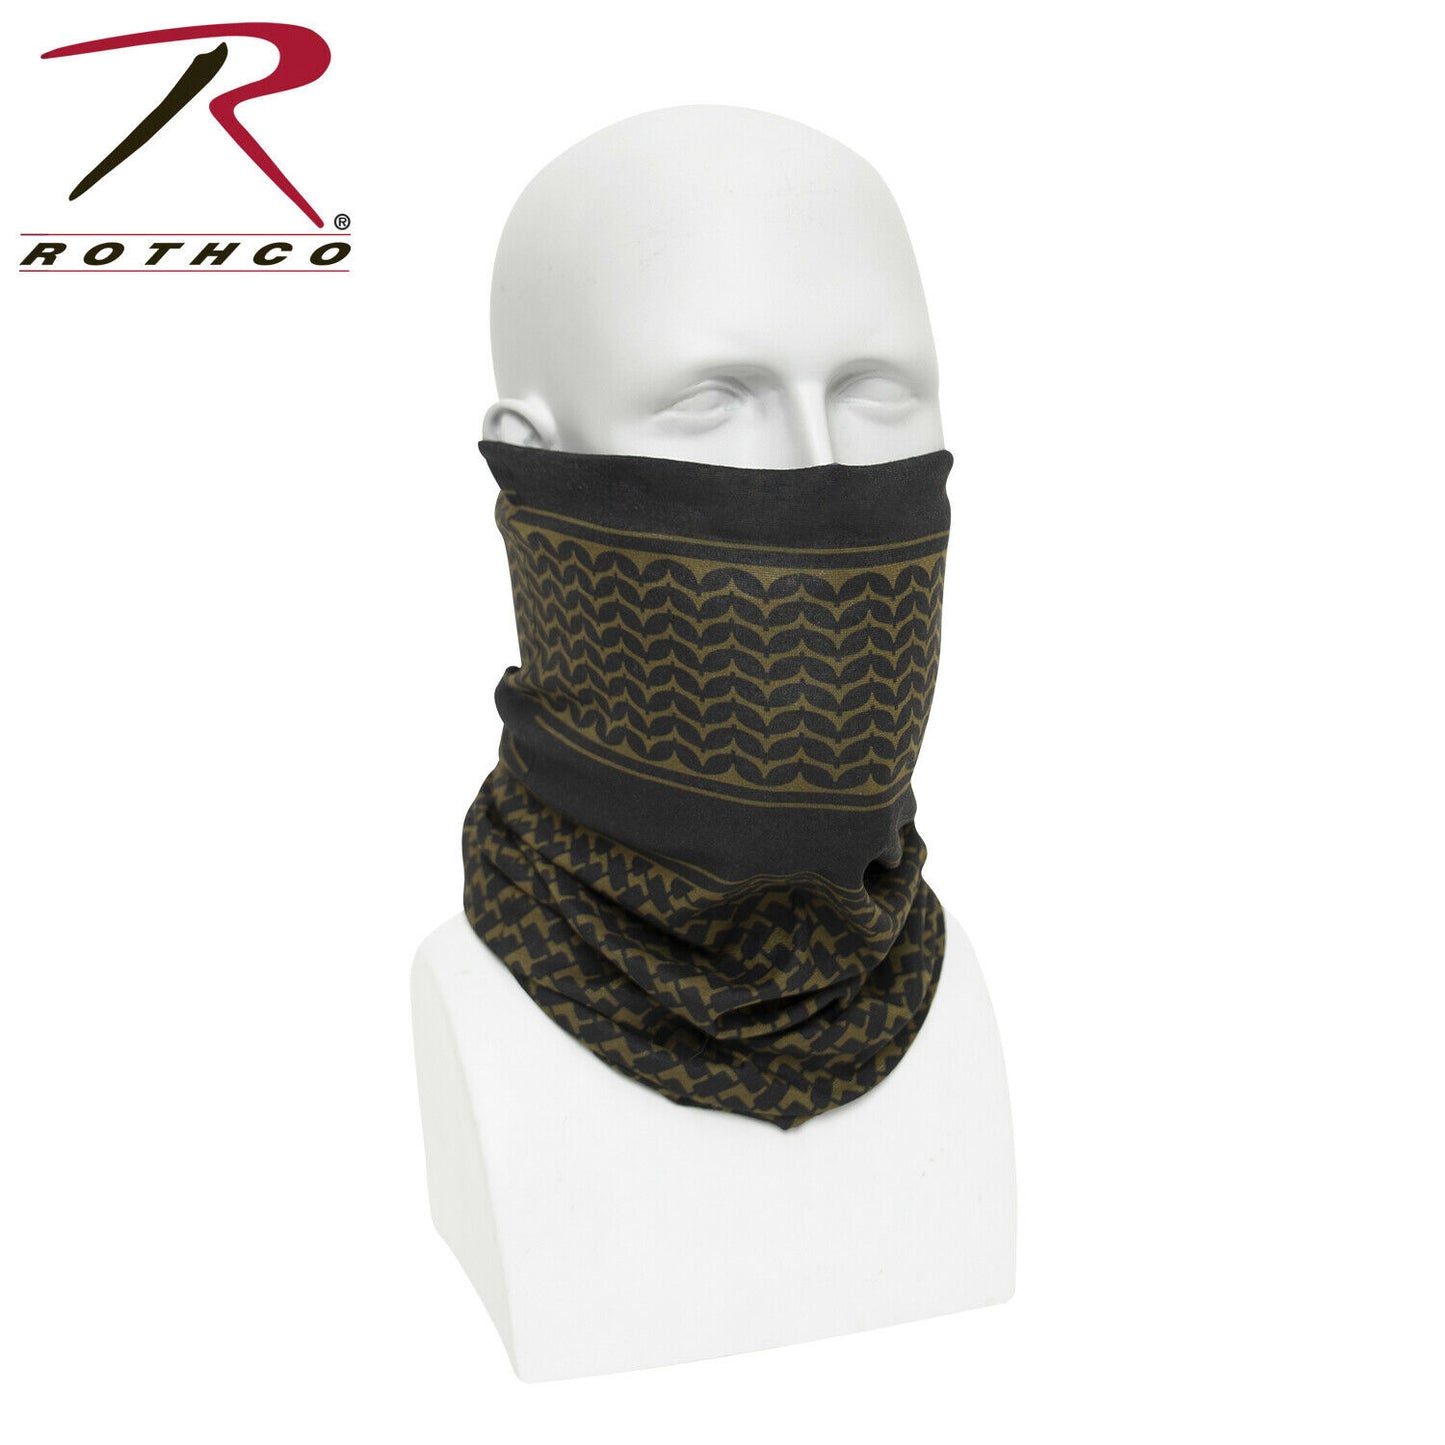 Rothco Multi-Use Tactical Wrap with Shemagh Print - Olive Drab or Coyote